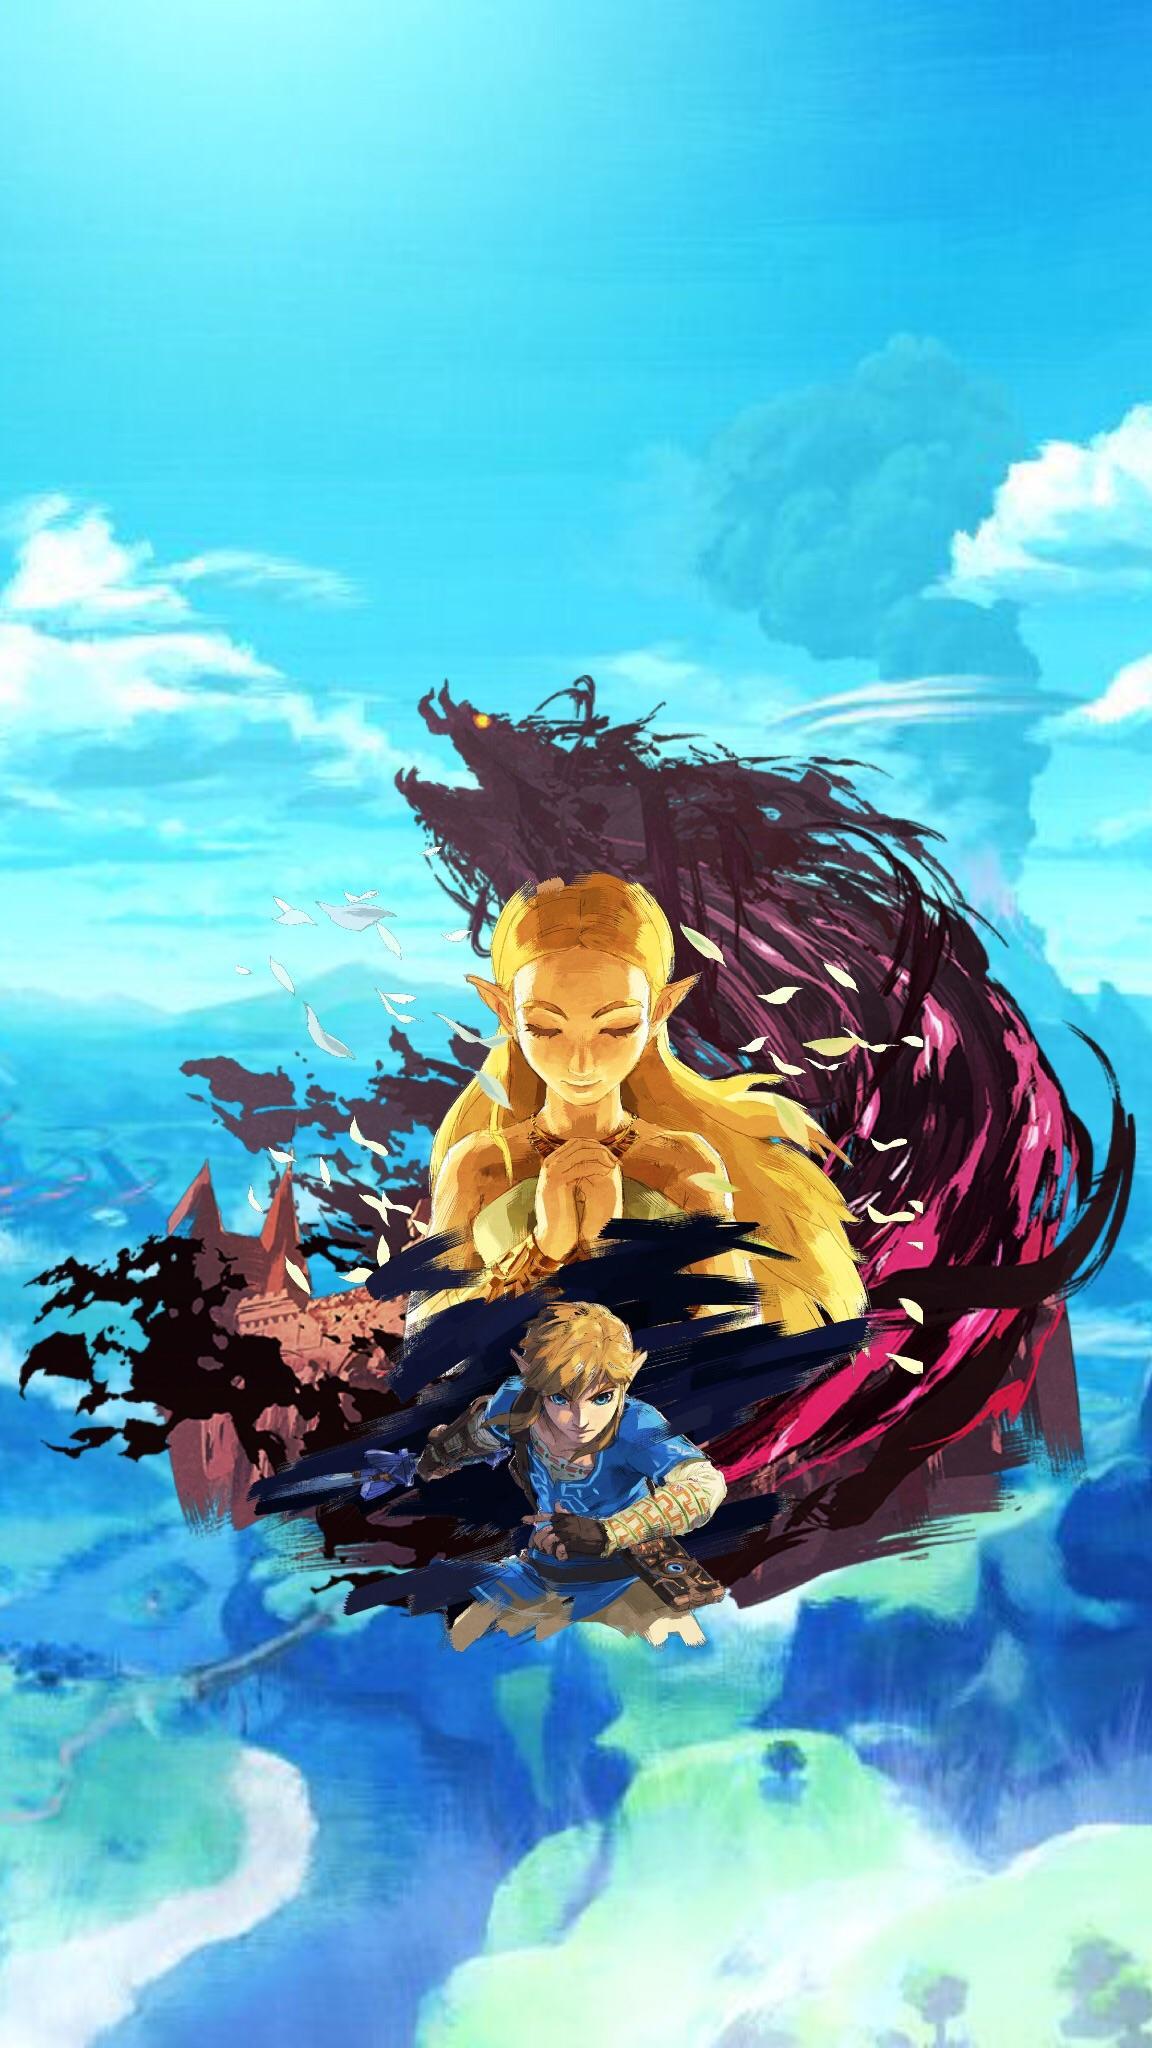 BotW iOS lock screen wallpapers I quickly whipped up if anyone